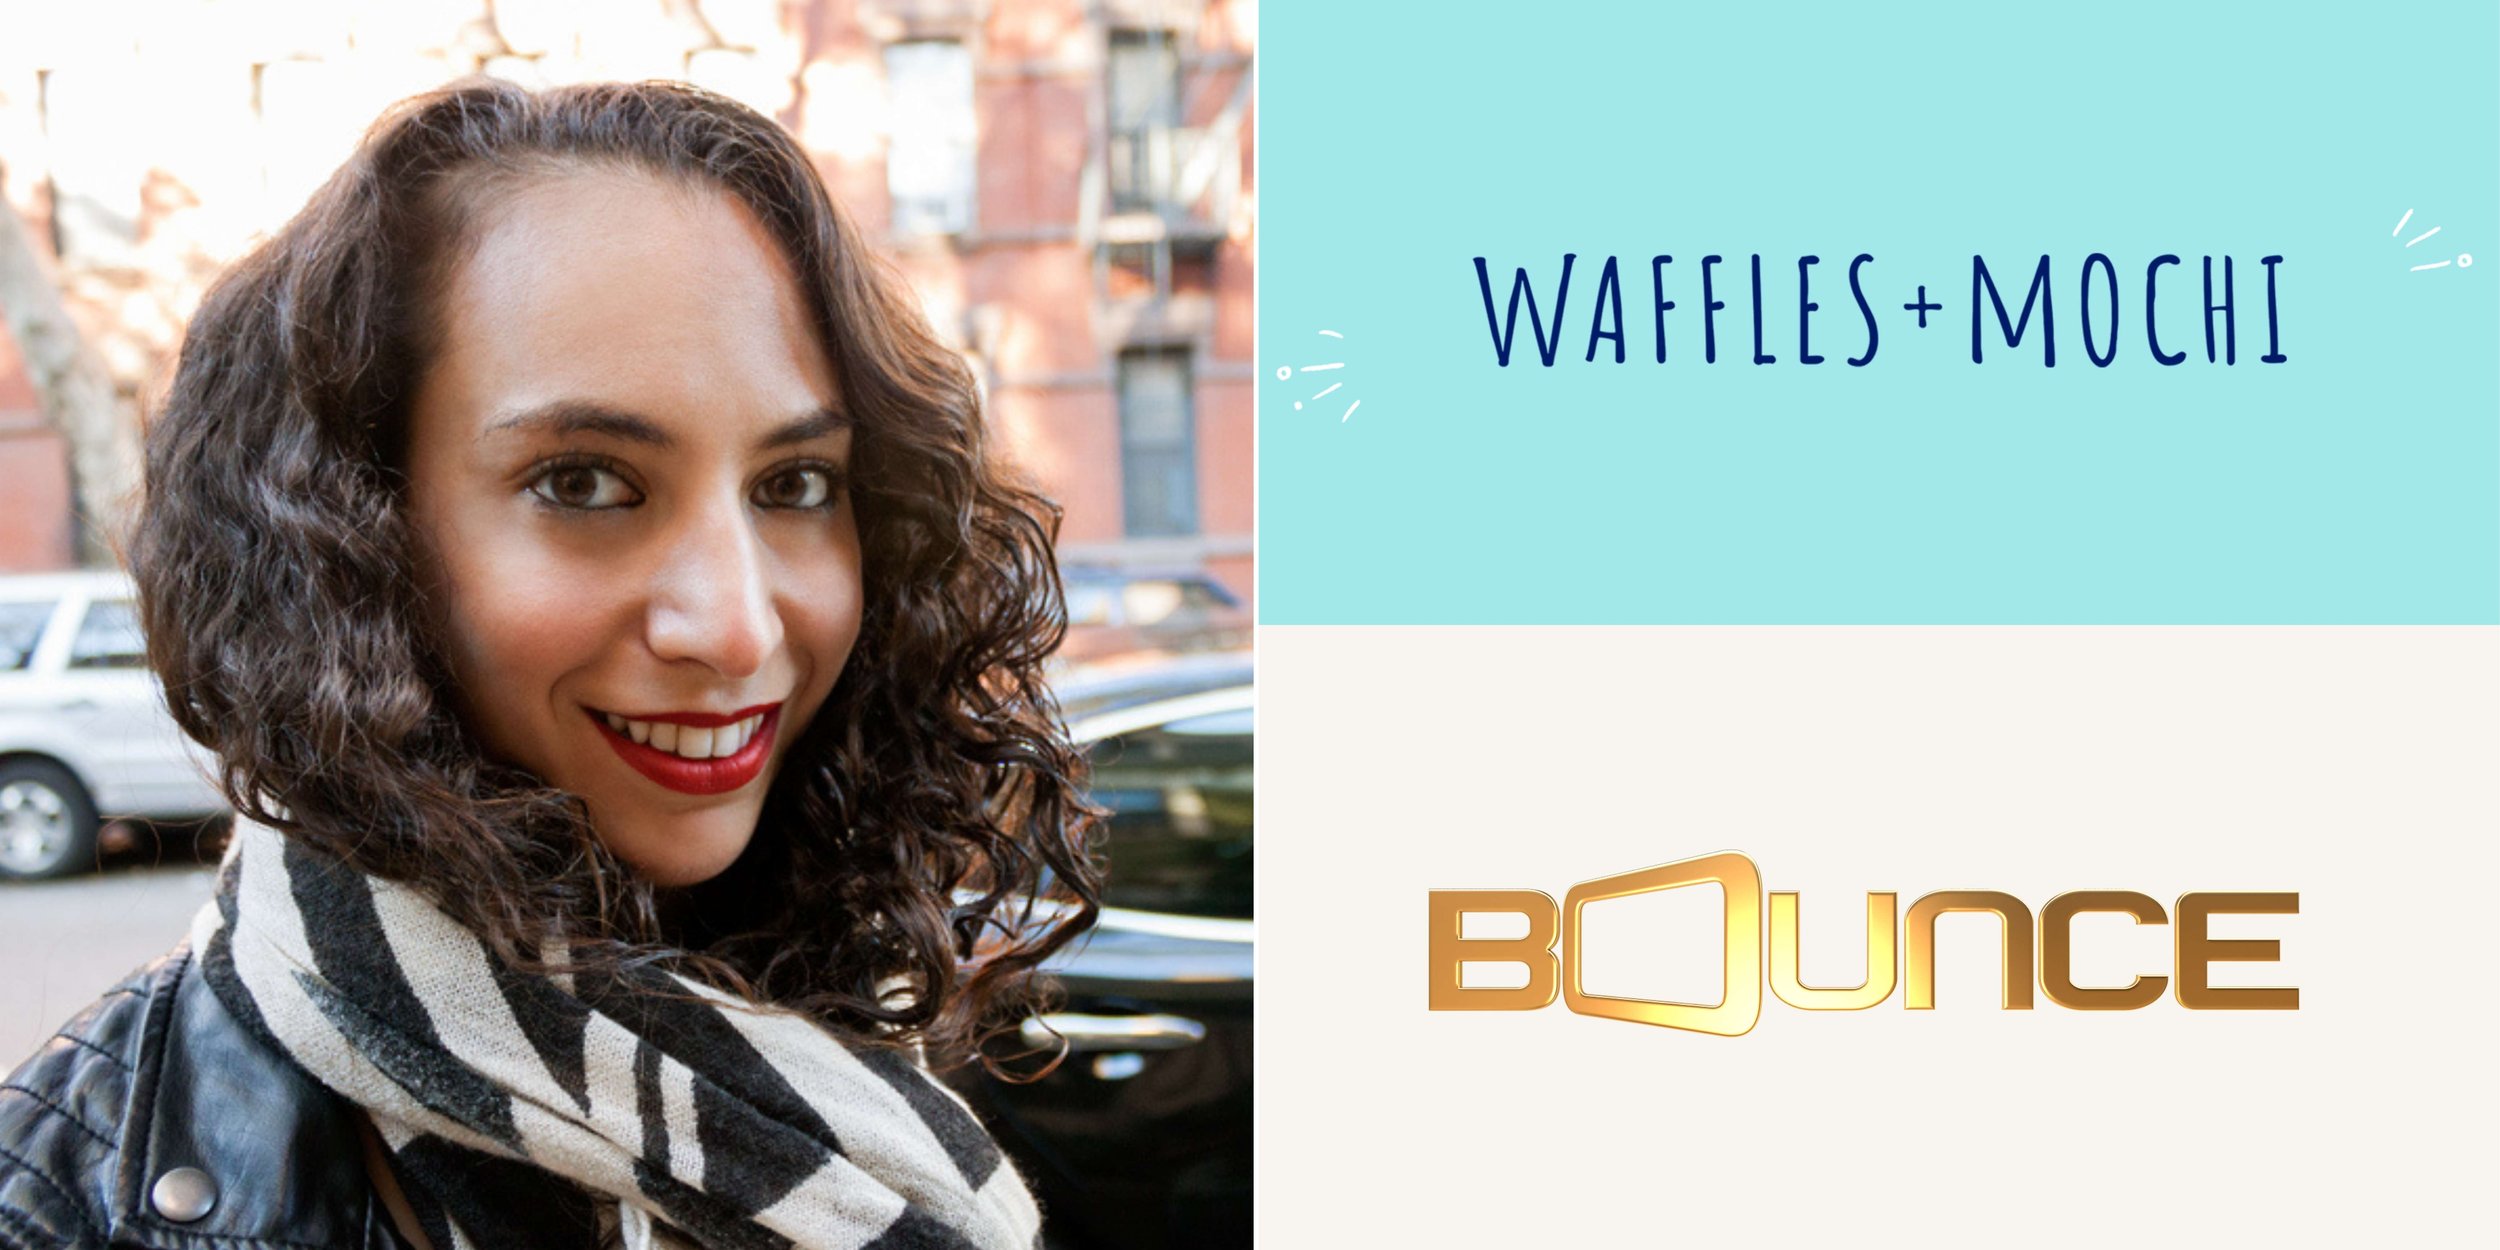  Lynn Maleh was hired as a Writers’ Assistant/Script Coordinator on Higher Ground's  Waffles + Mochi  and a Writers' Assistant for an upcoming comedy on Bounce TV. 